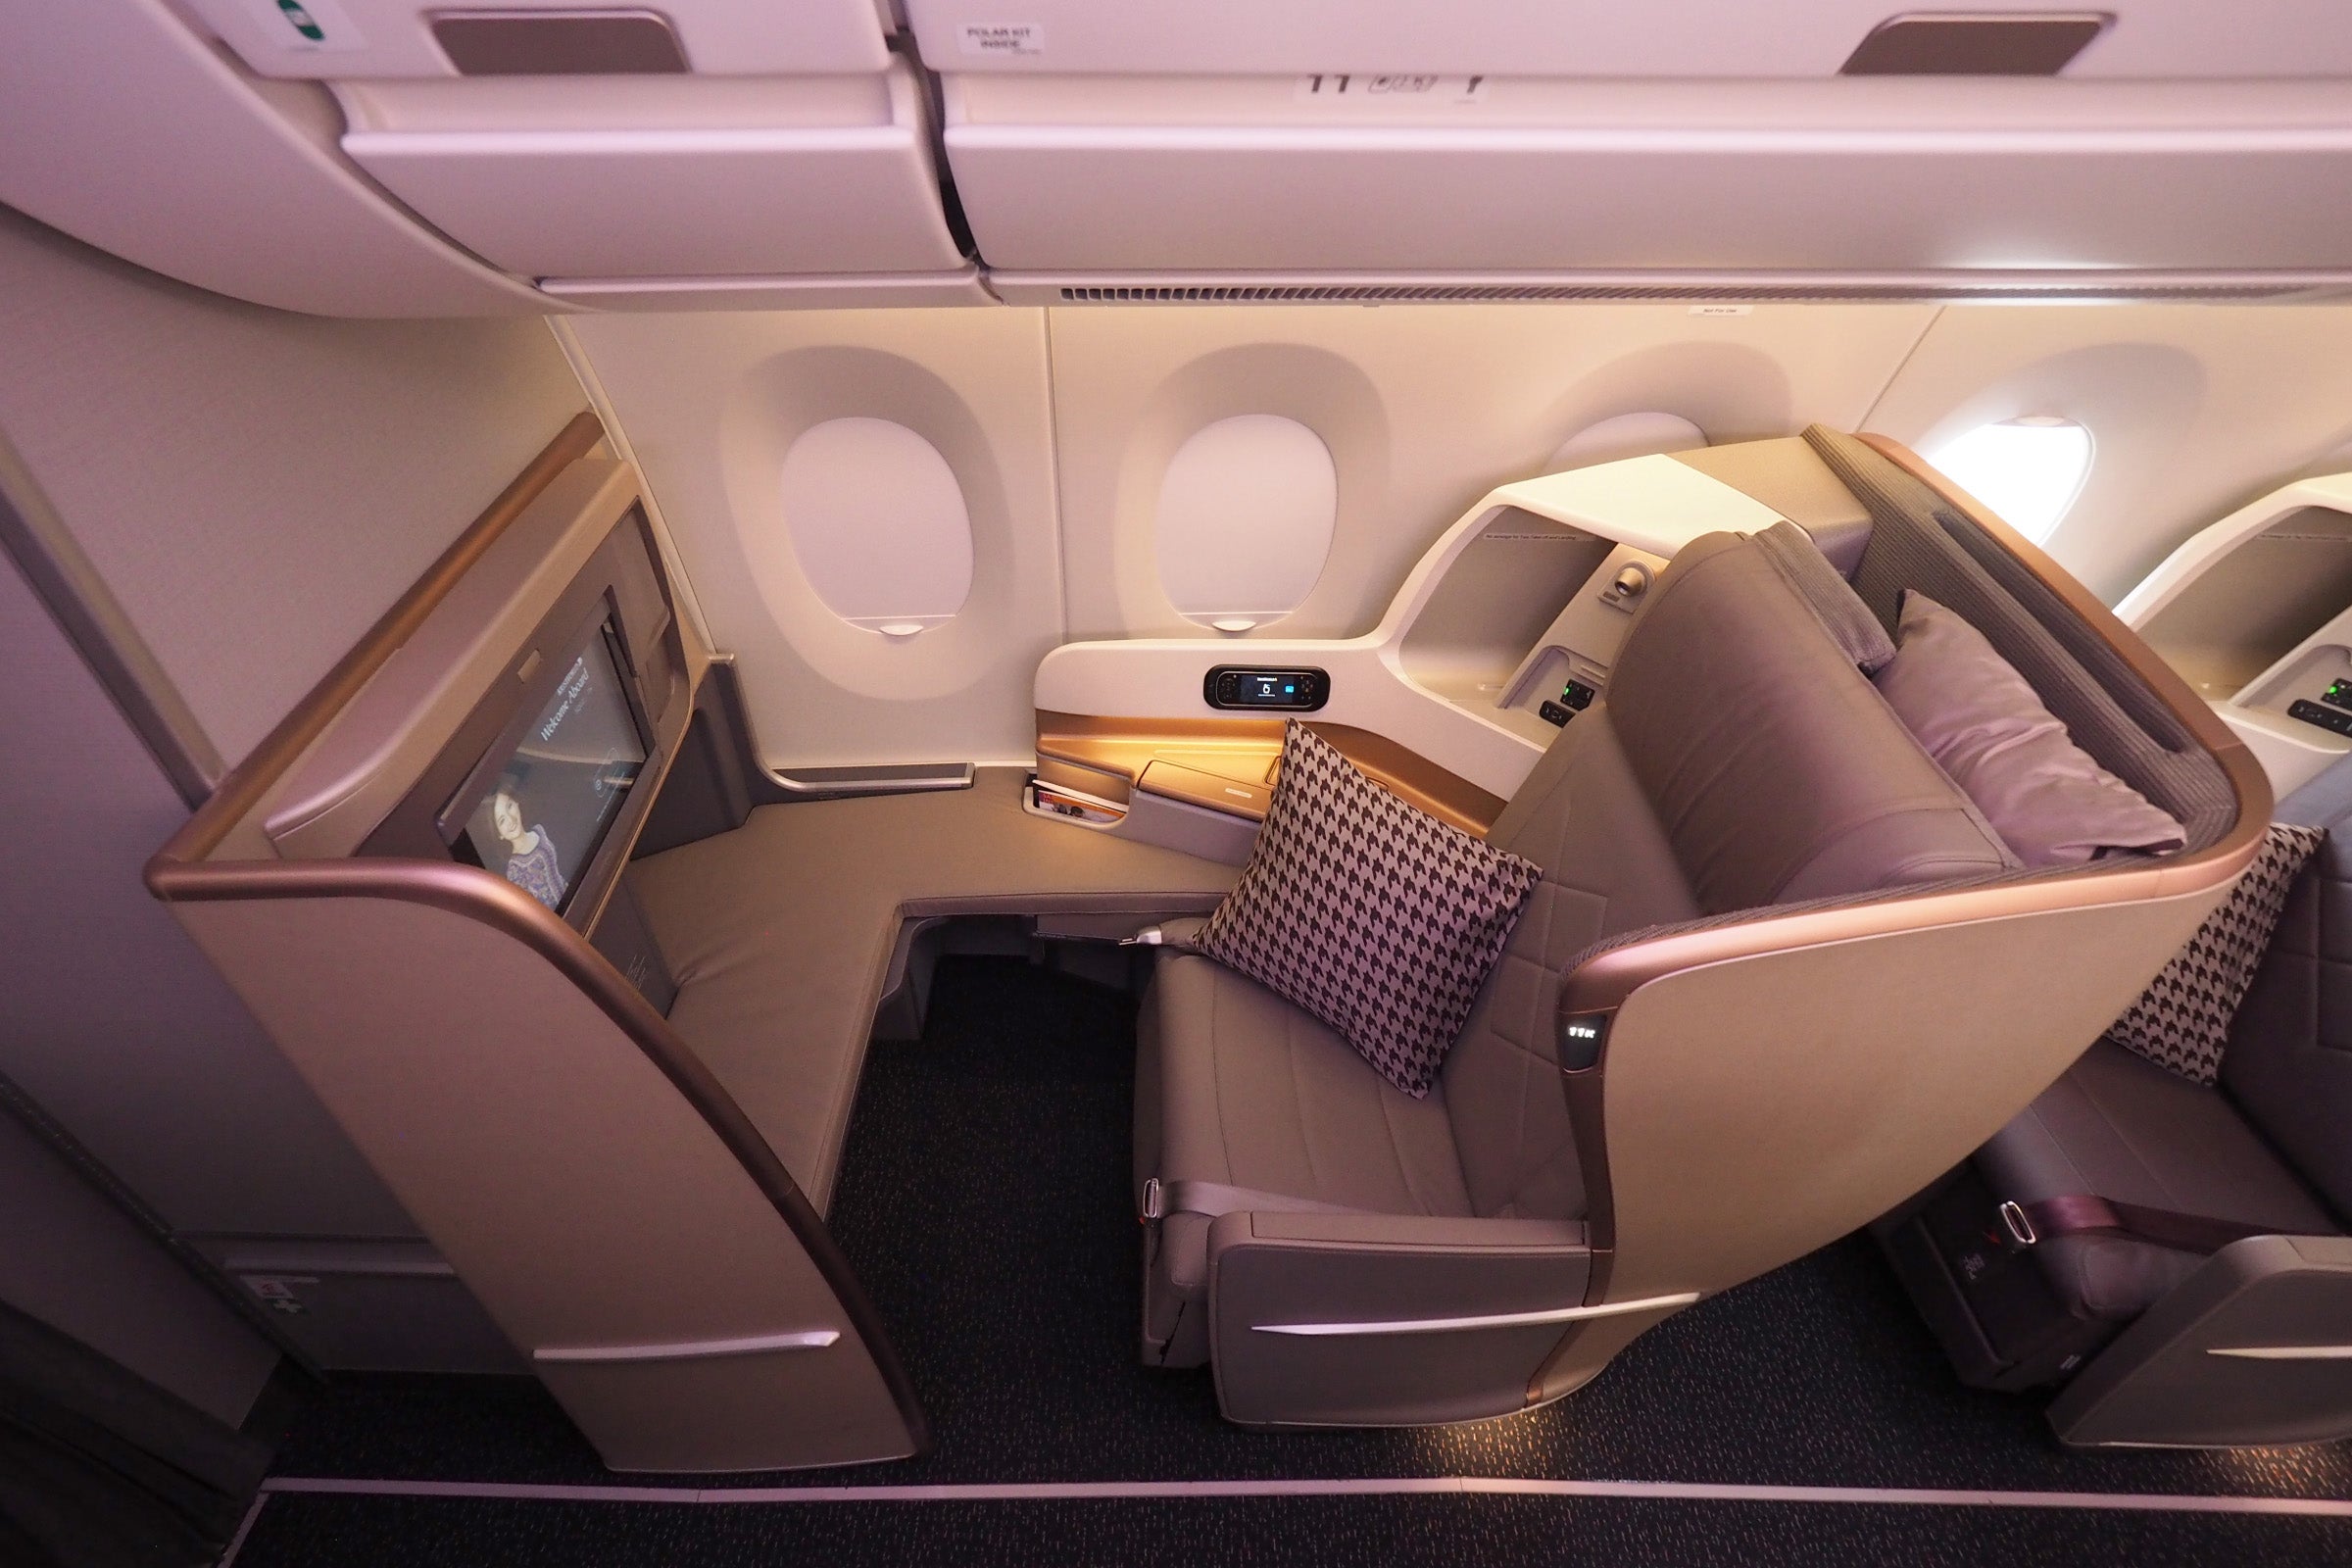 Singapore Airlines A350 Business Class. Photo by Zach Honig / The Points Guy